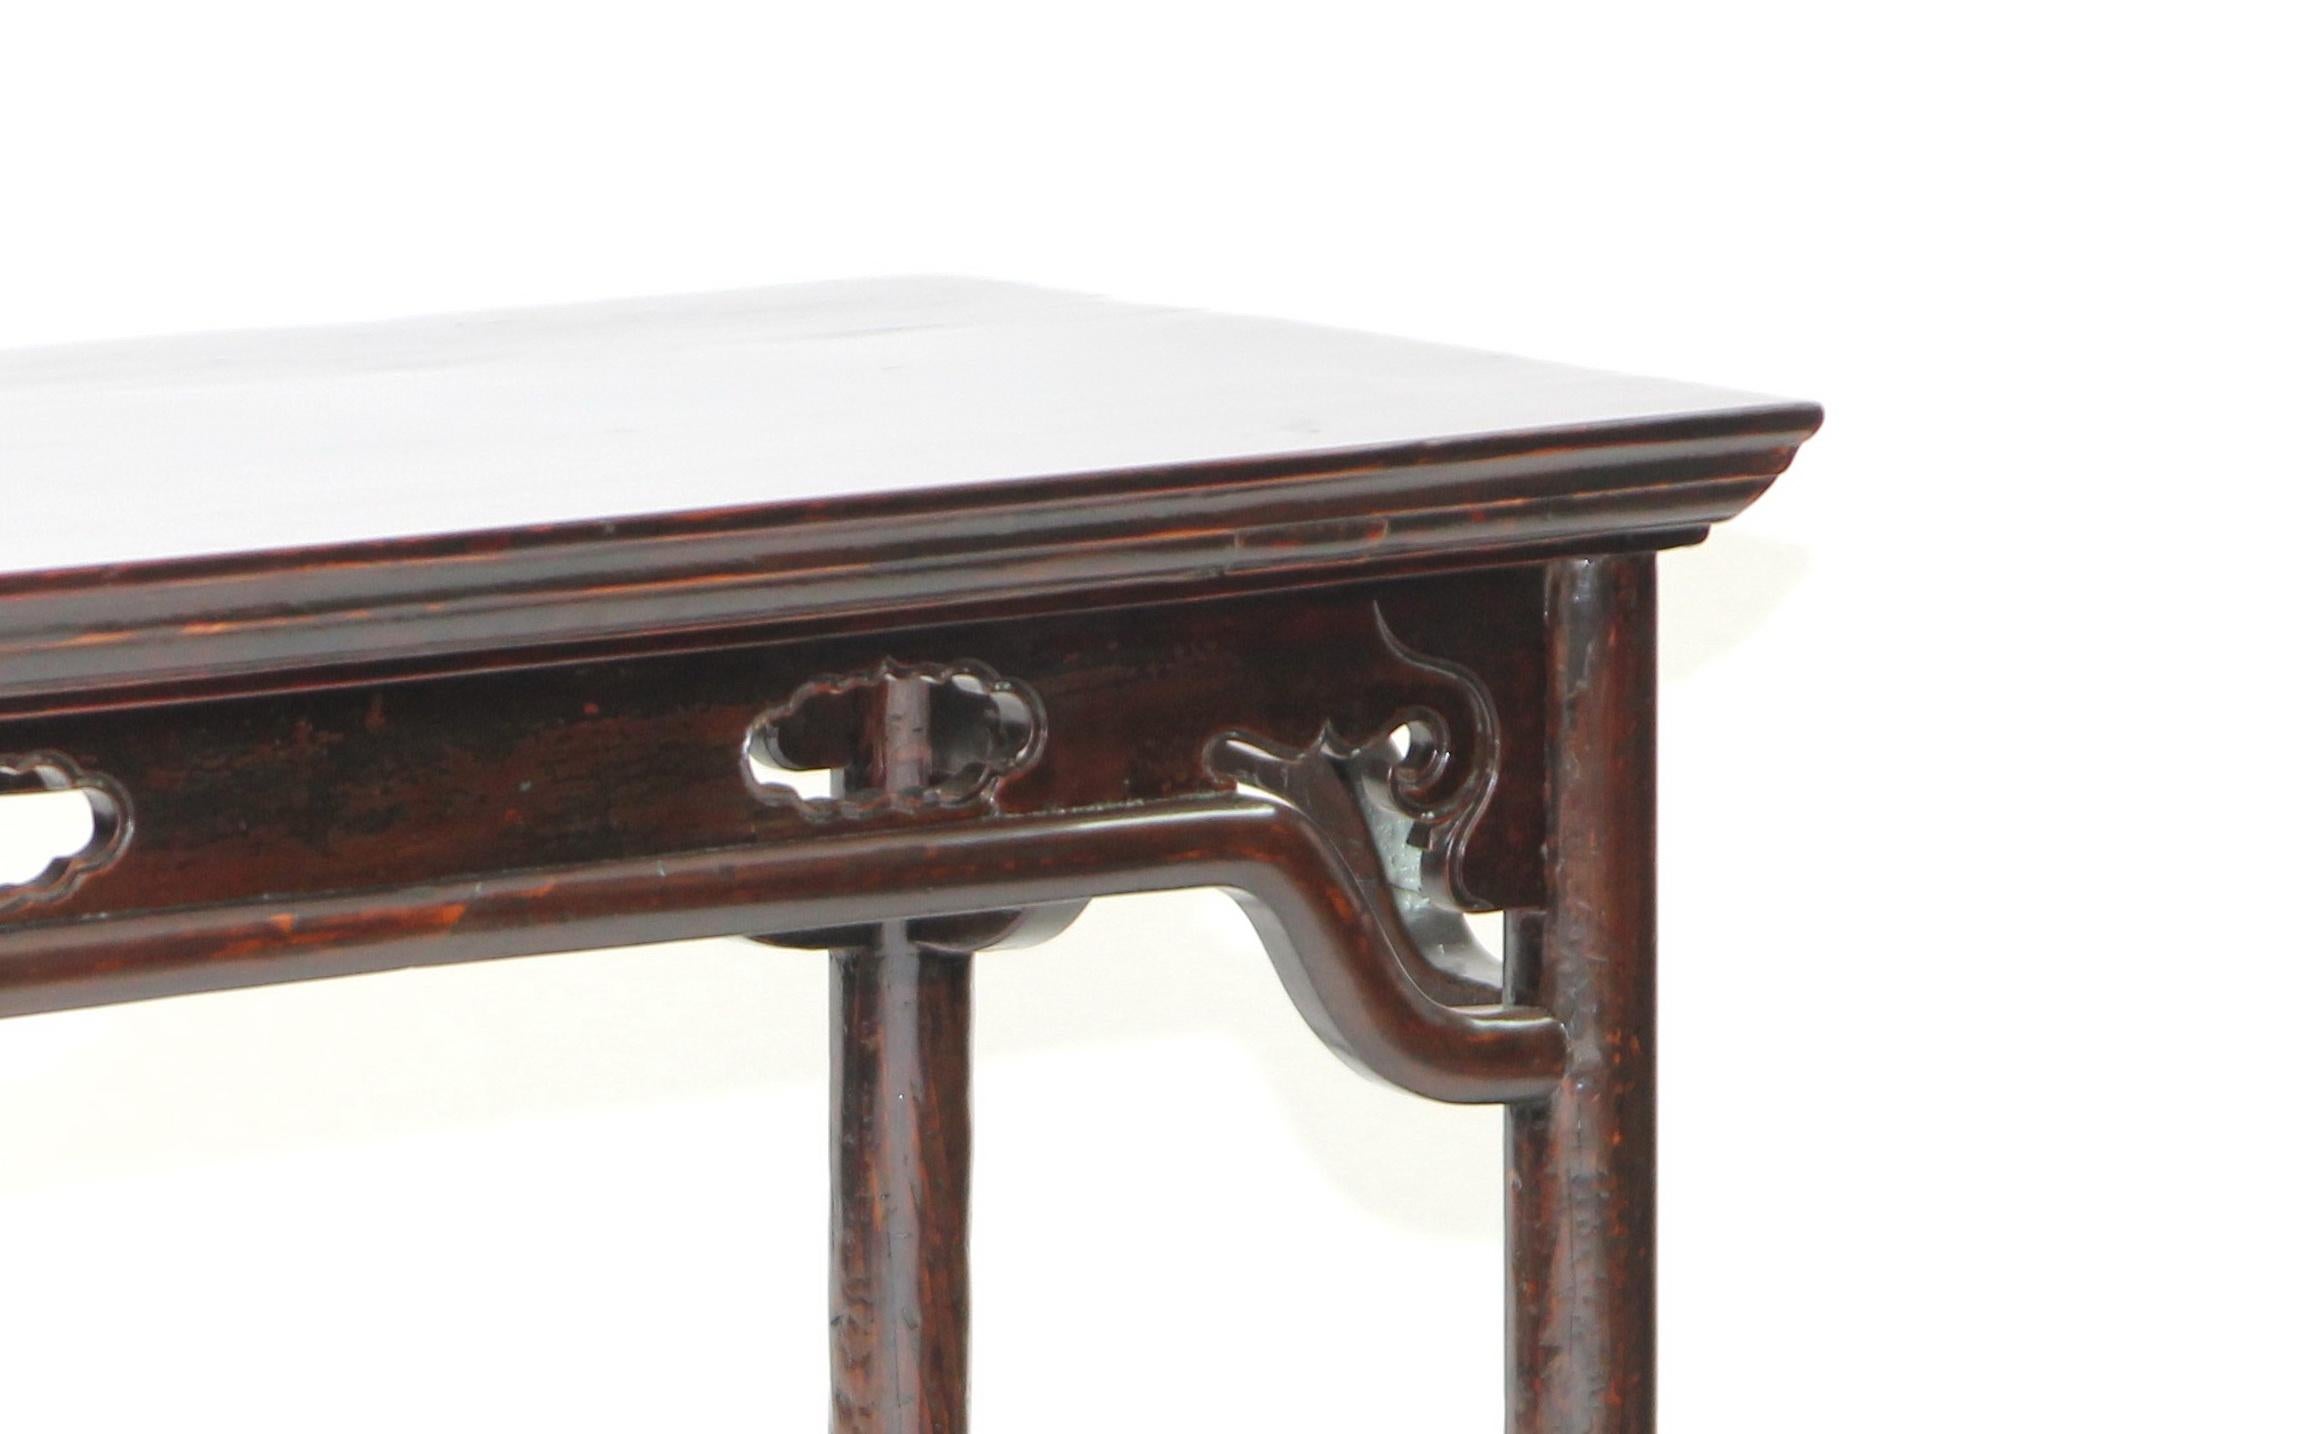 Hand-Carved Antique Chinese Table with Open-carved Aprons and Attached Humpback Stretchers